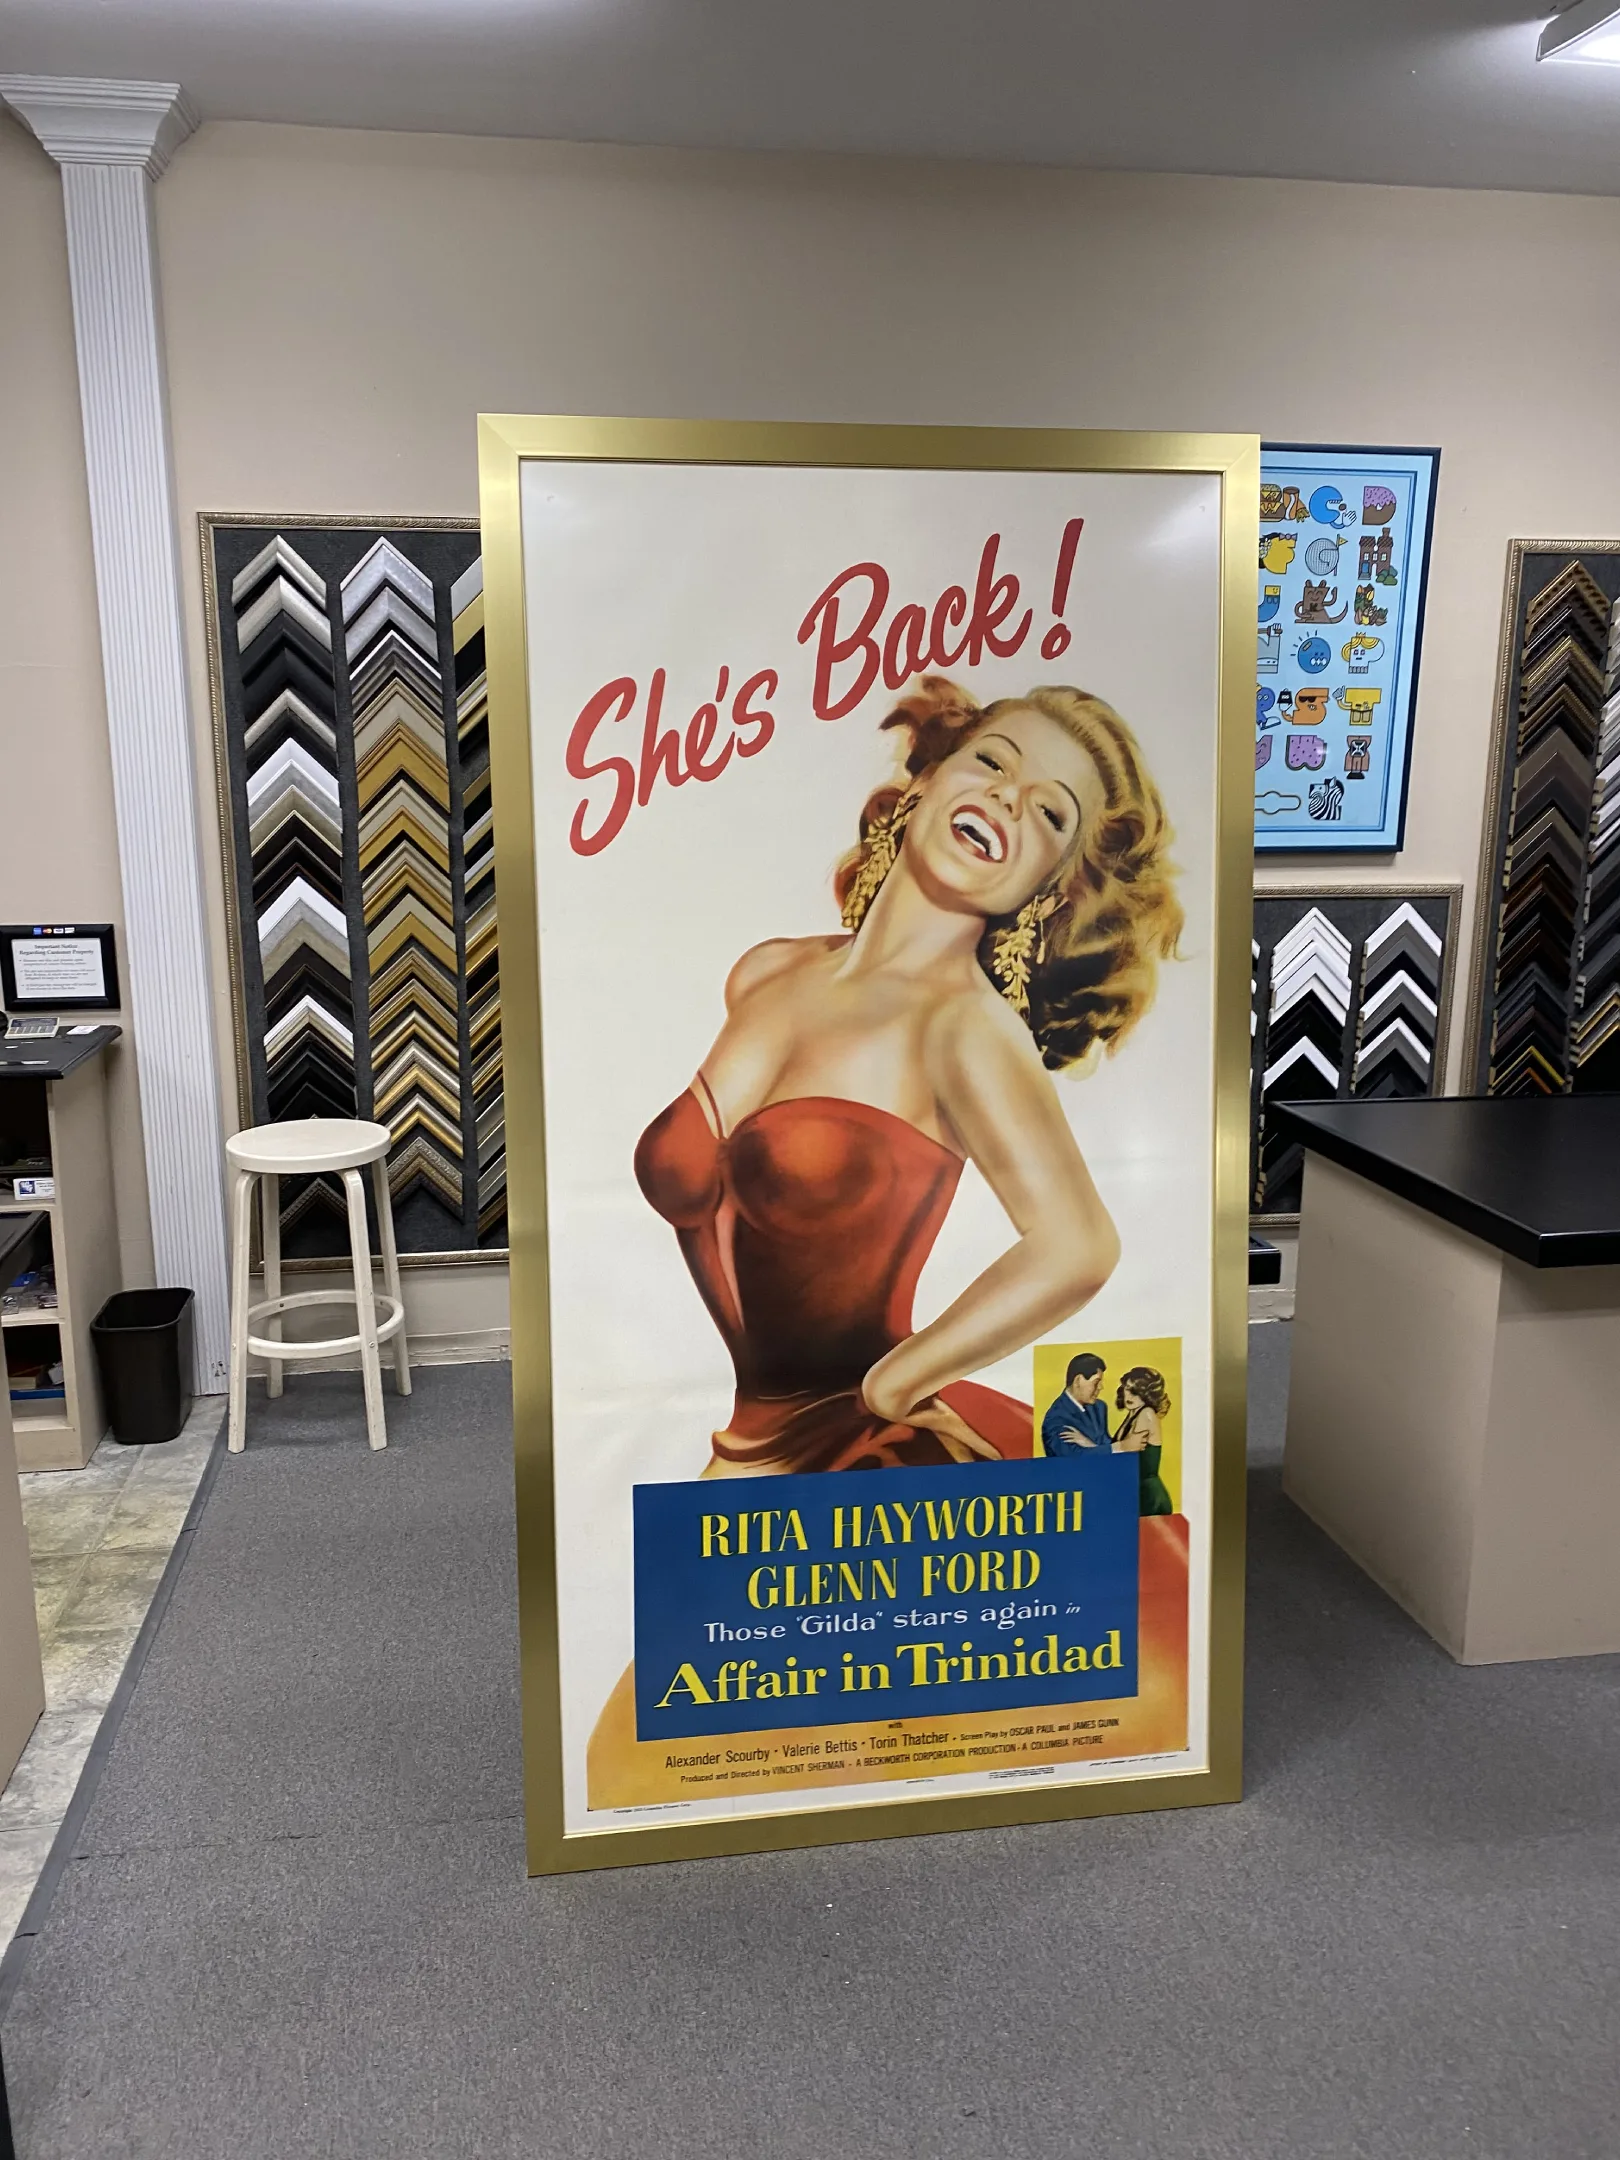 A large poster of a woman in a red dress